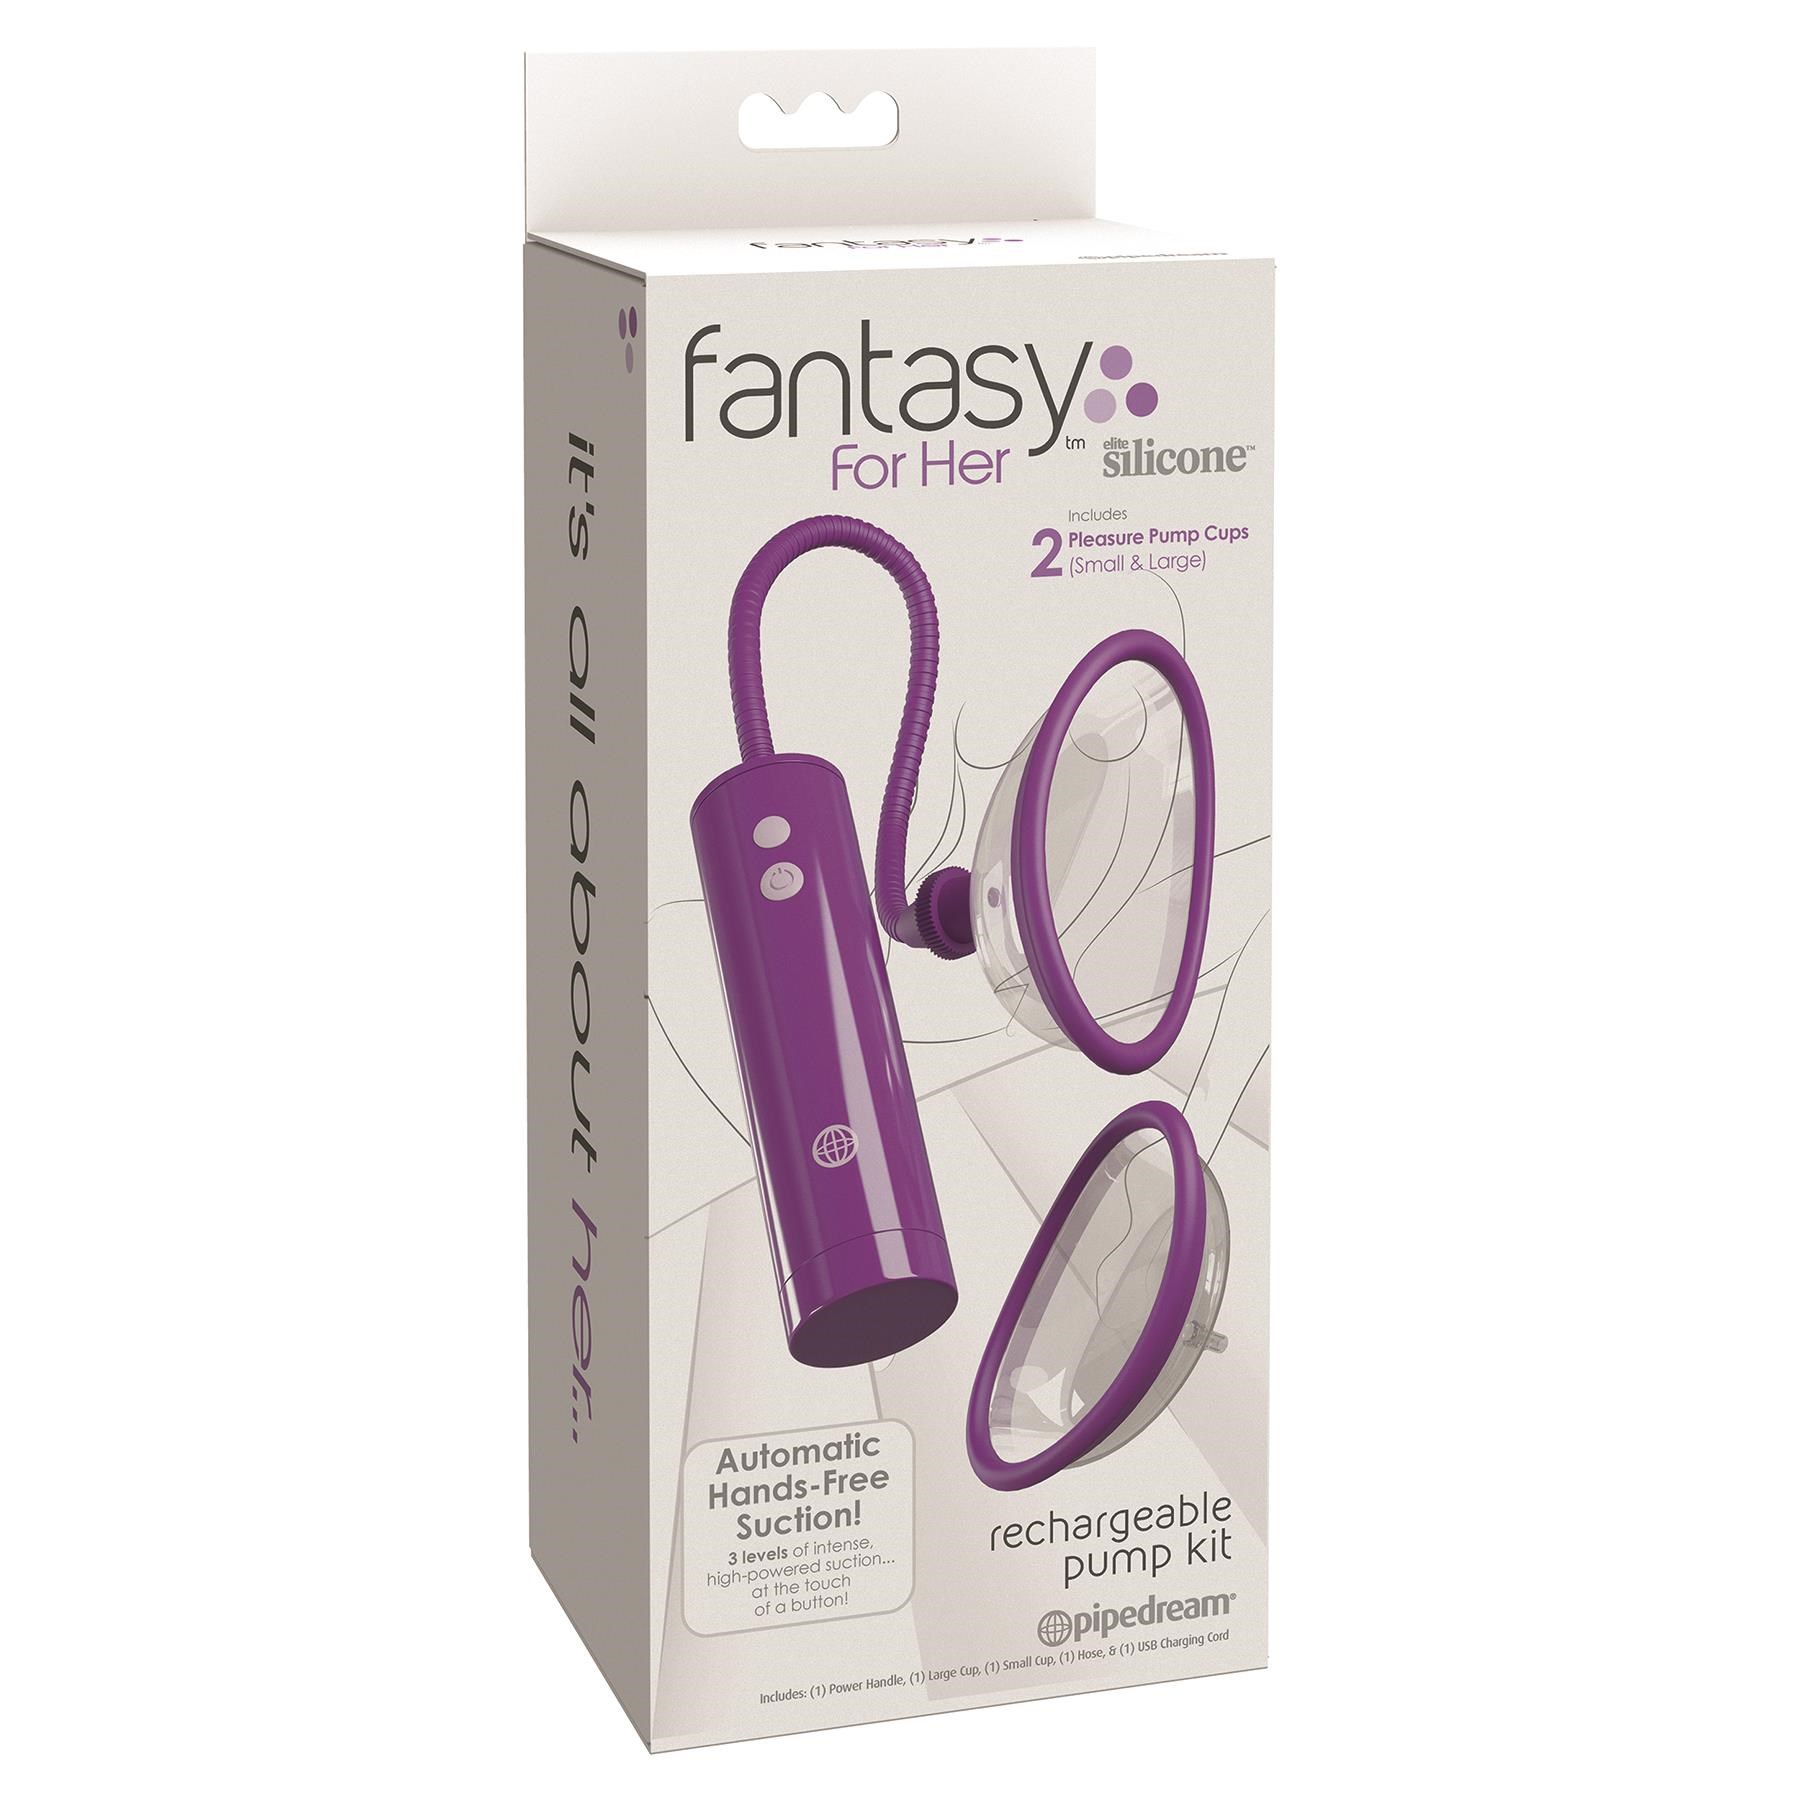 Fantasy For Her Rechargeable Pussy Pump Kit - Box Shot